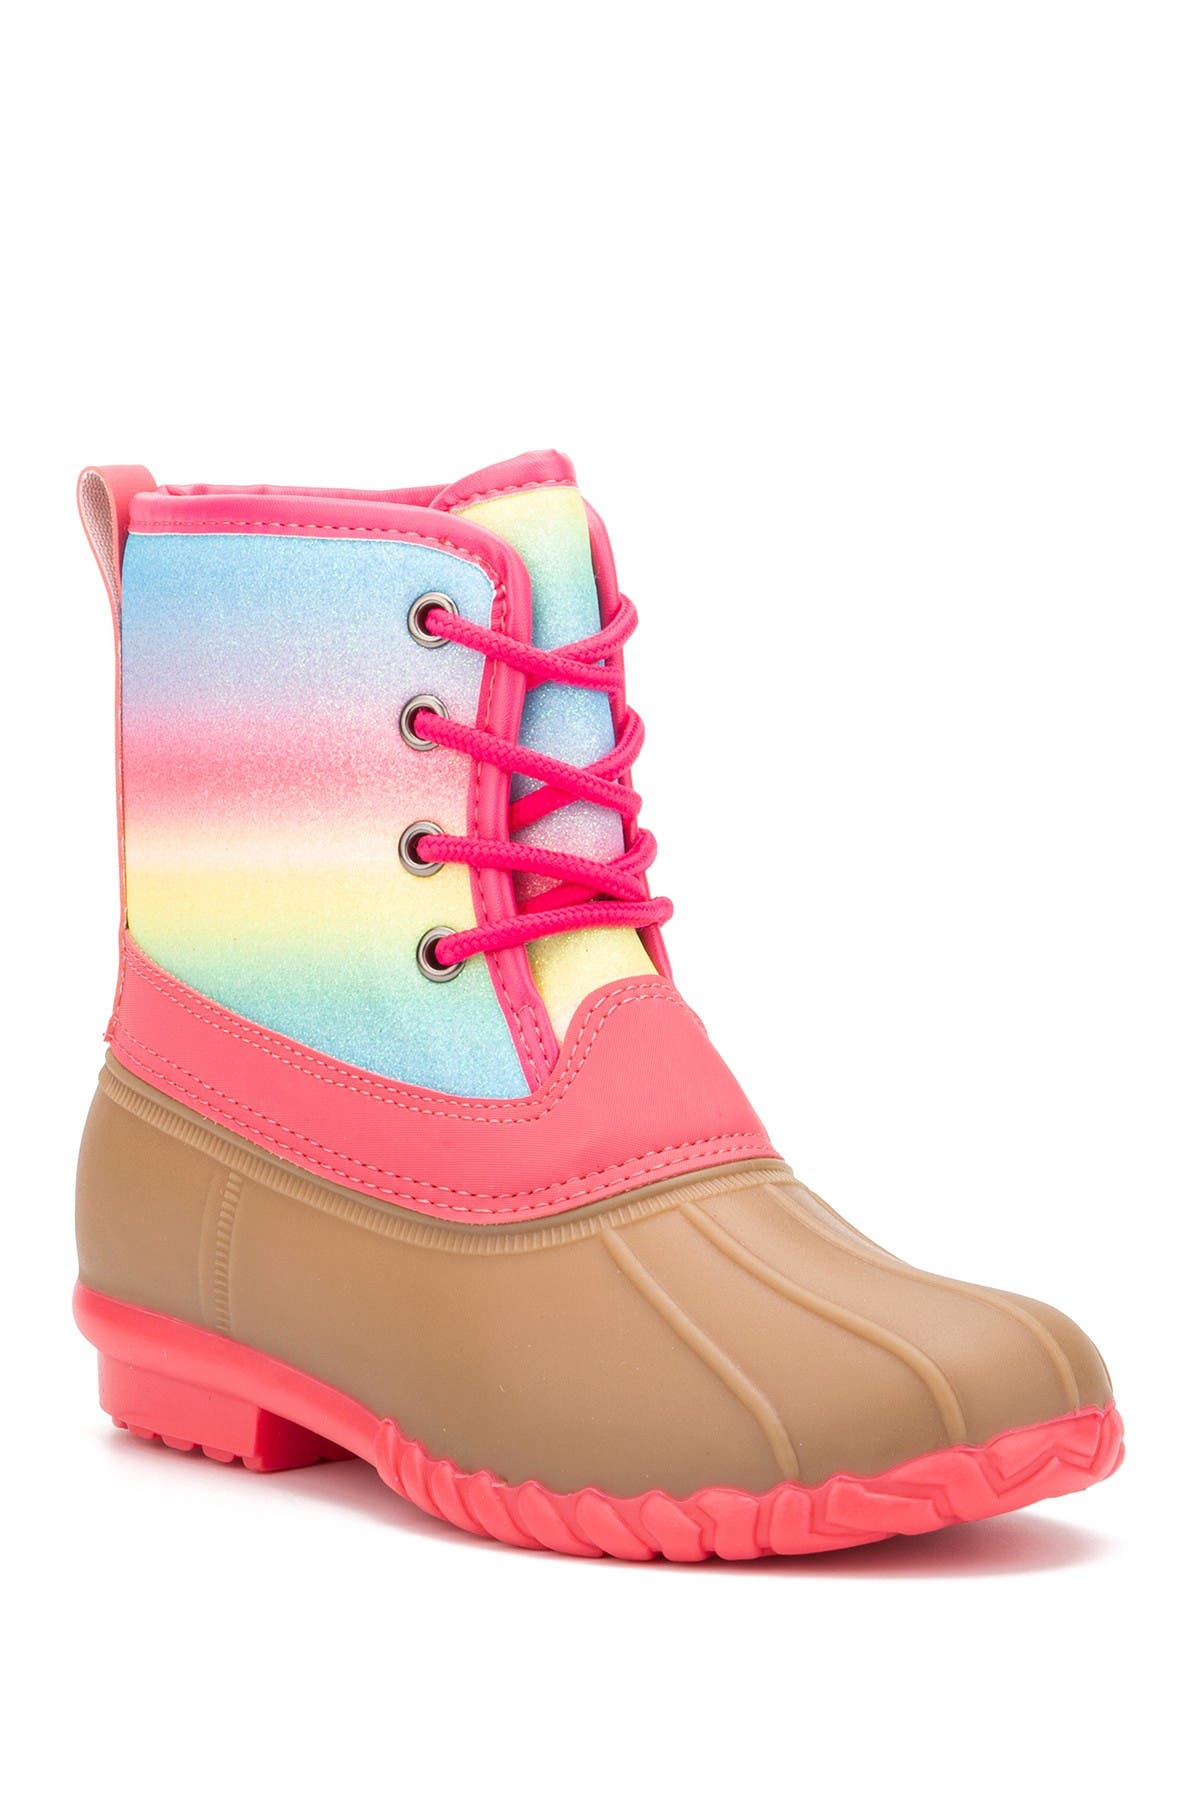 rainbow boot laces